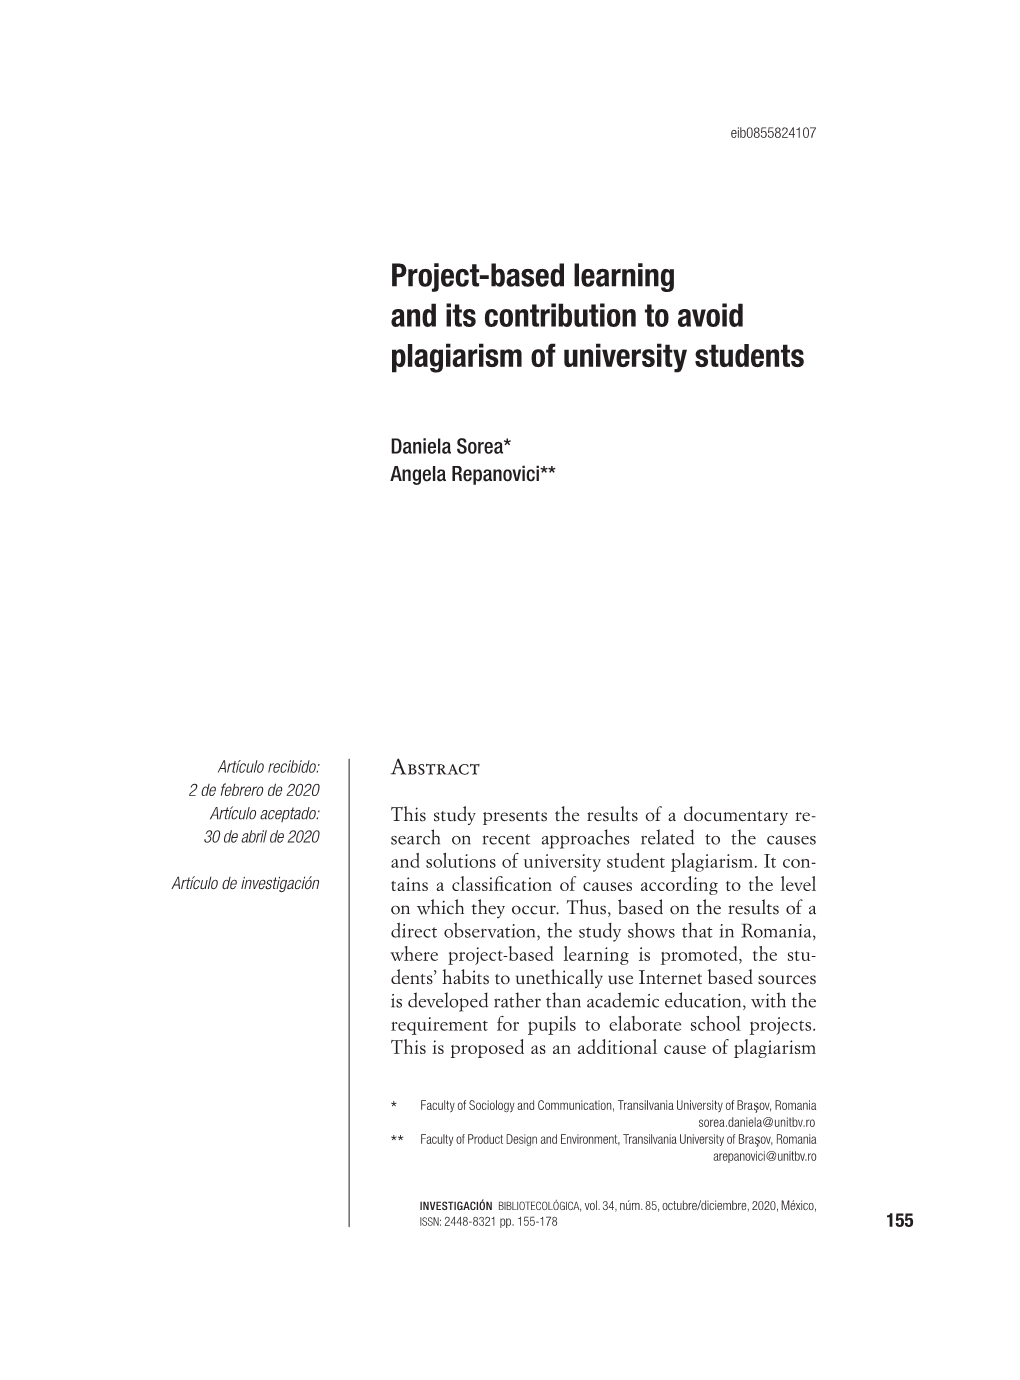 Project-Based Learning and Its Contribution to Avoid Plagiarism of University Students